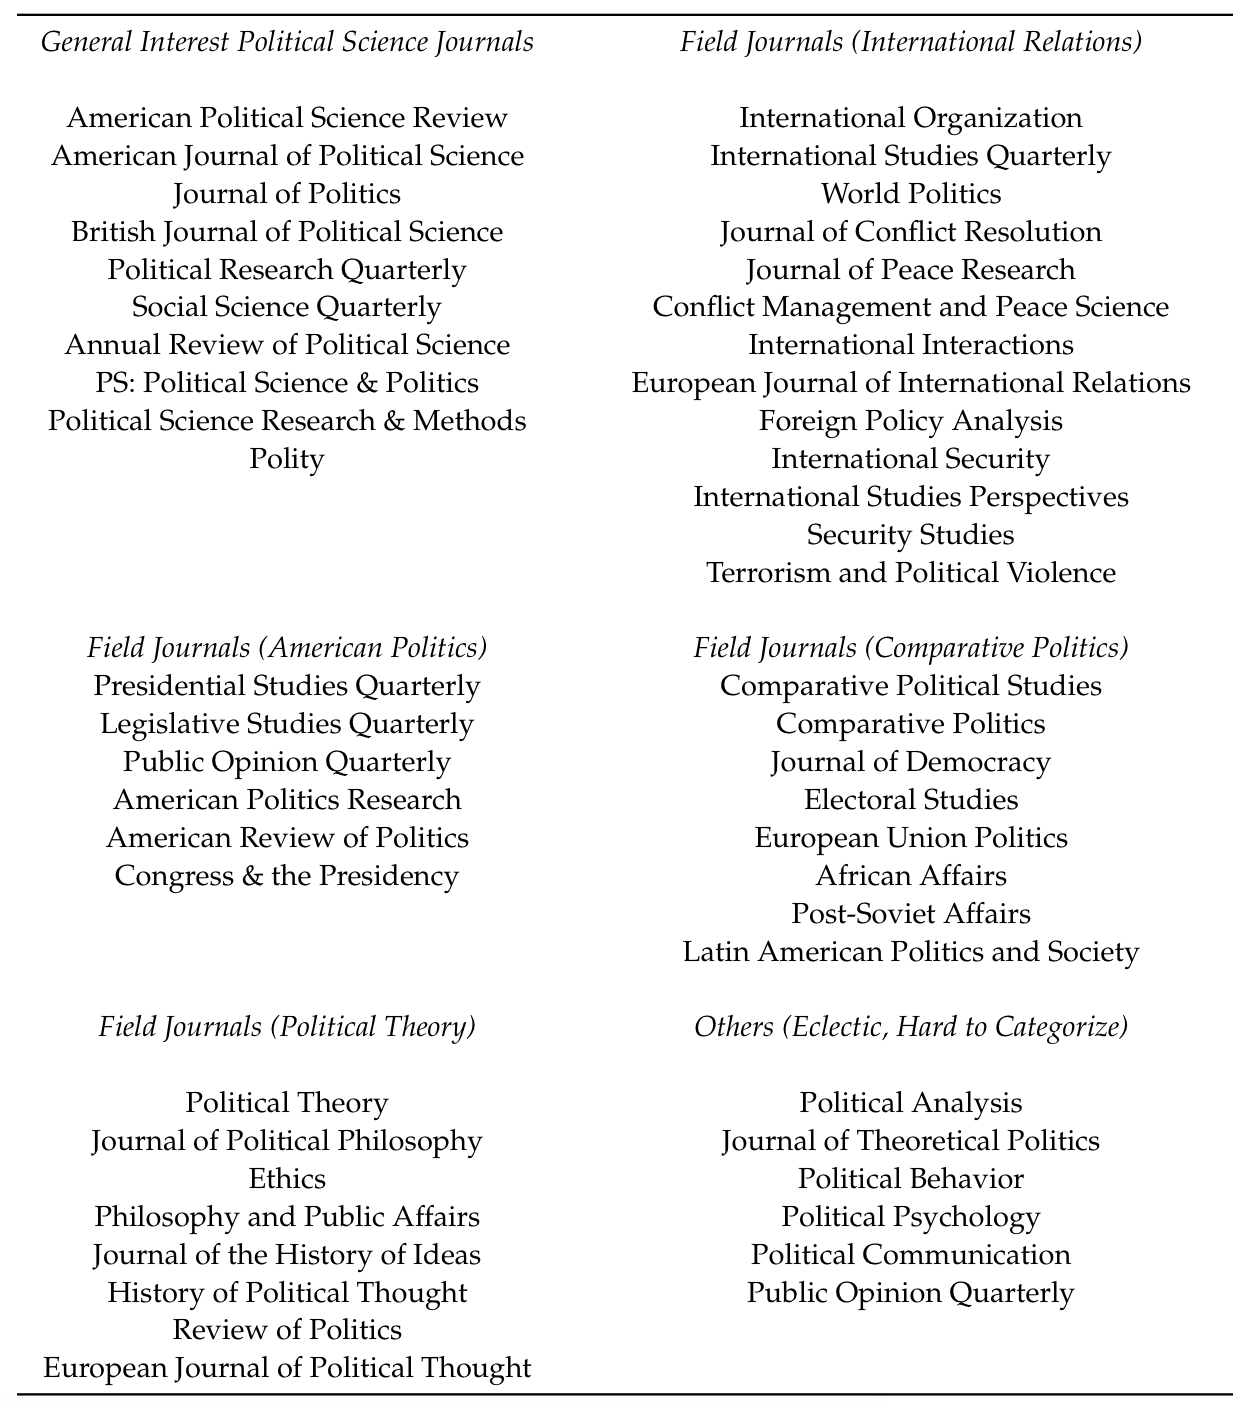 Top Journals in Political Science